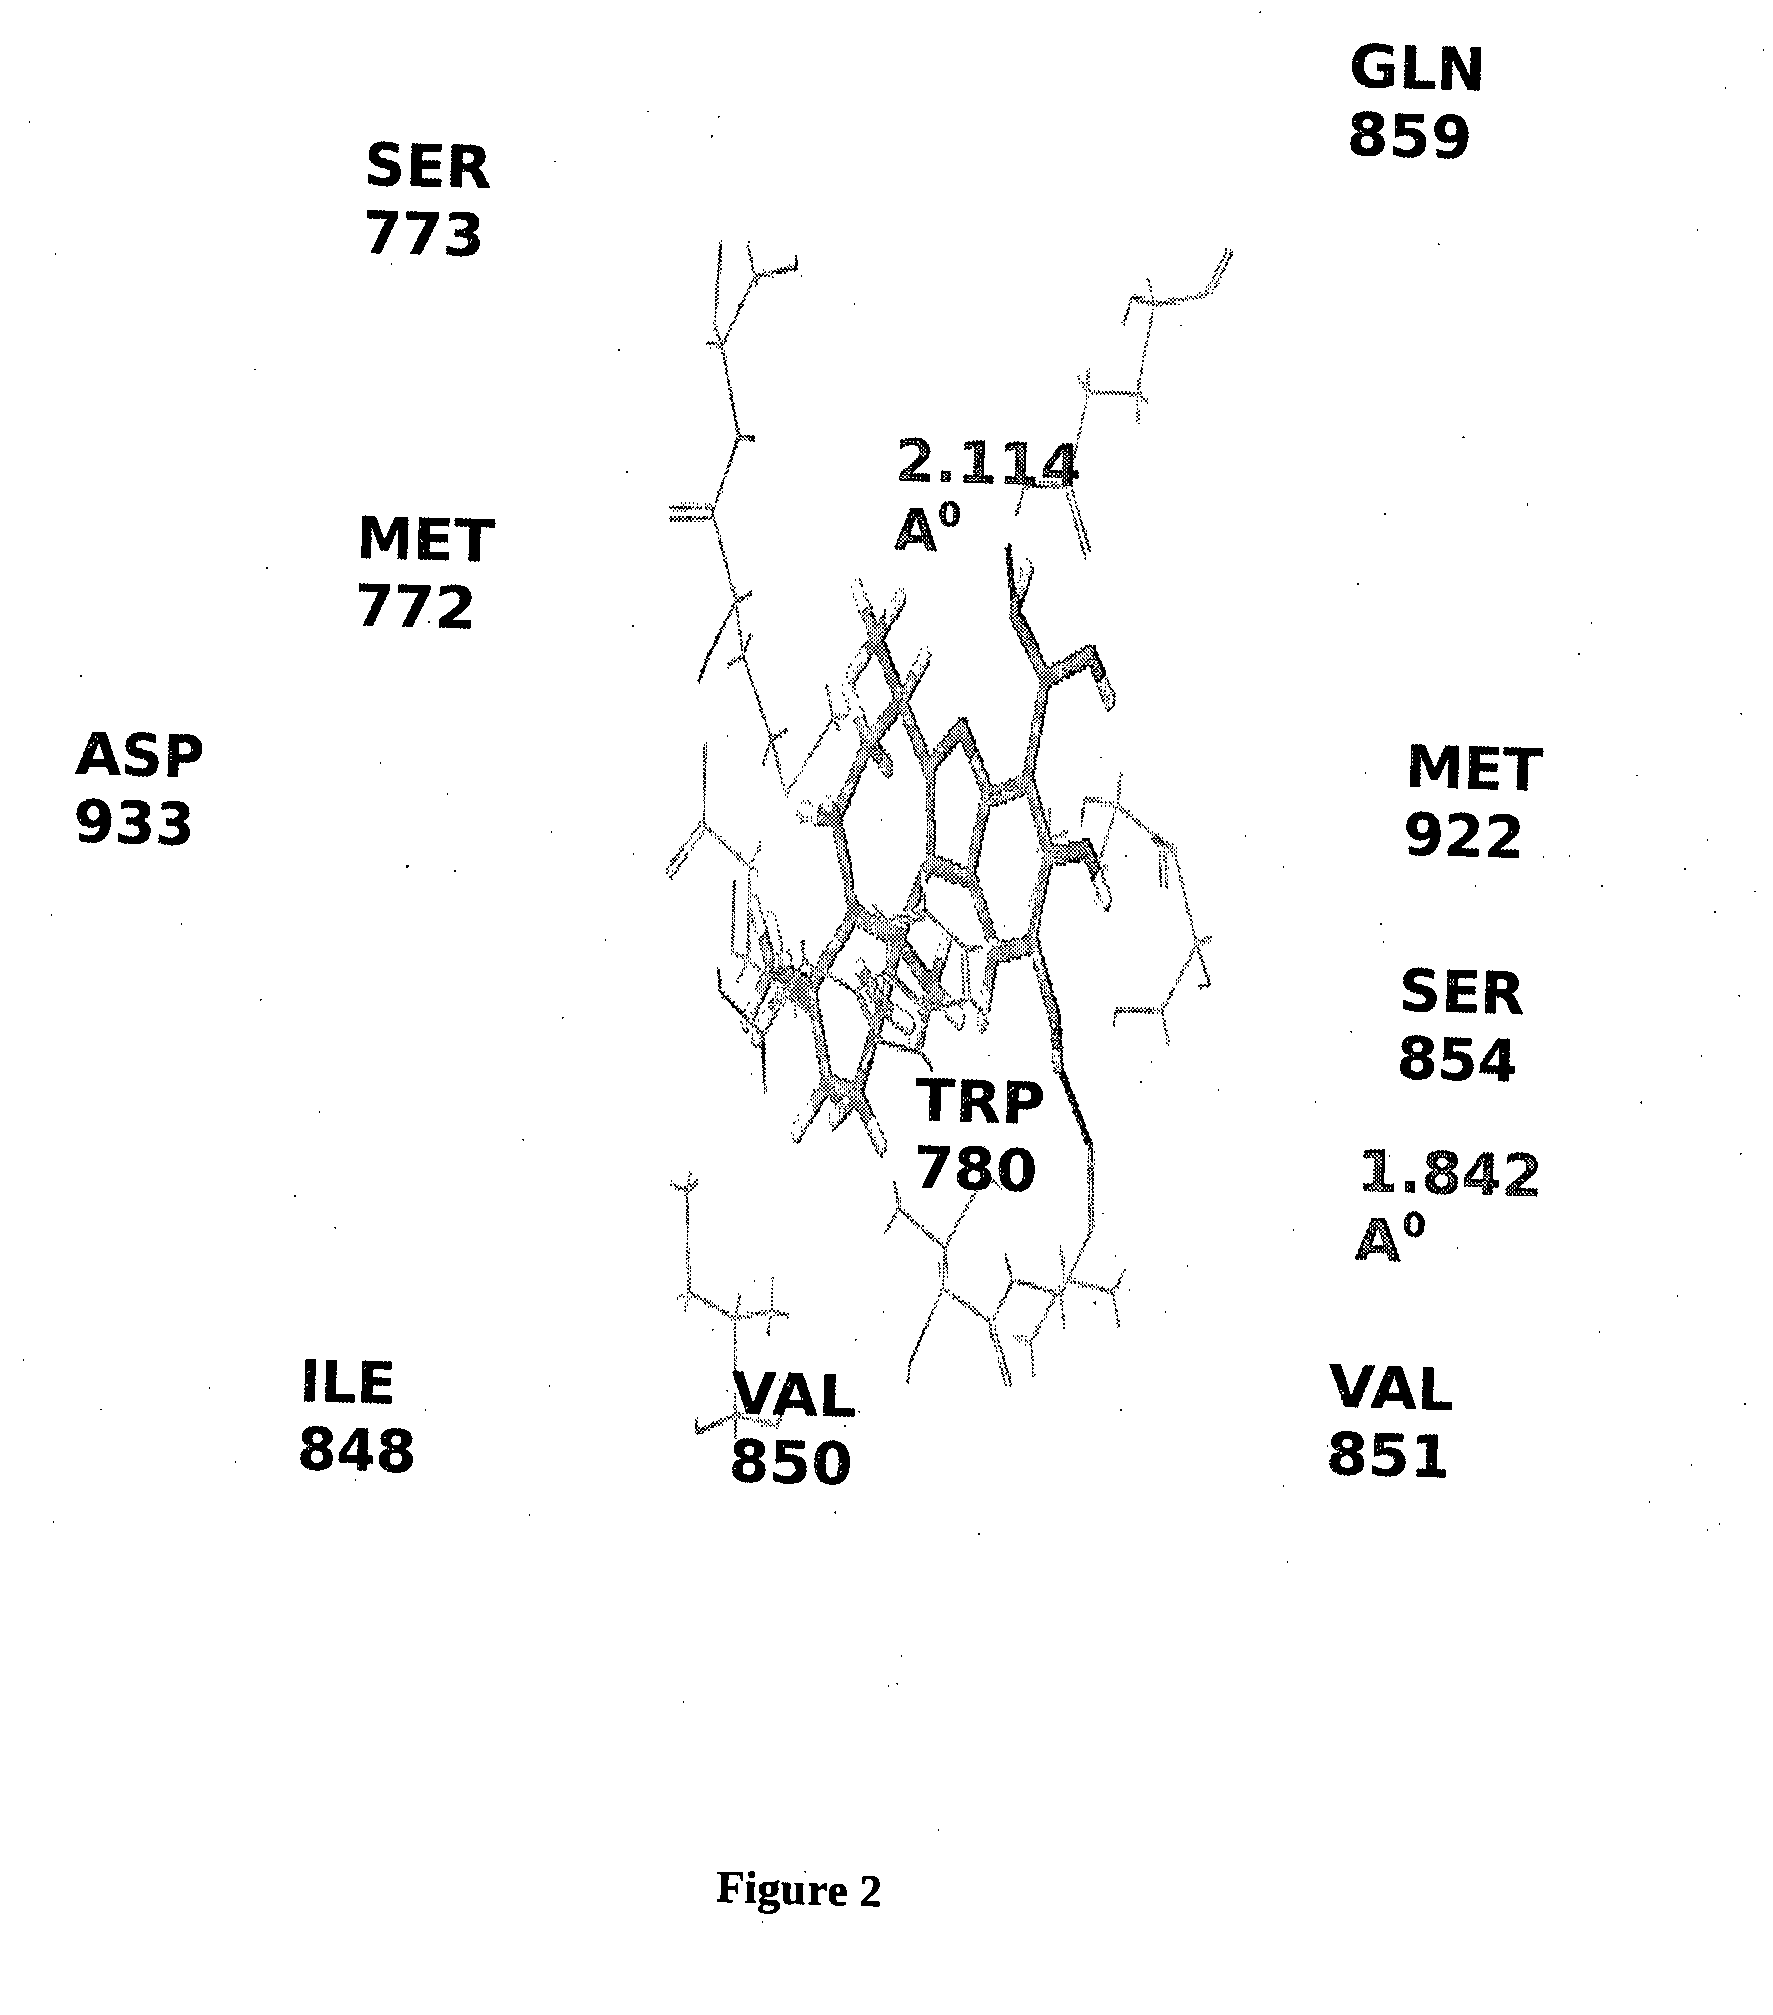 BORONIC ACID BEARING LIPHAGANE COMPOUNDS AS INHIBITORS OF P13K- a AND/OR B